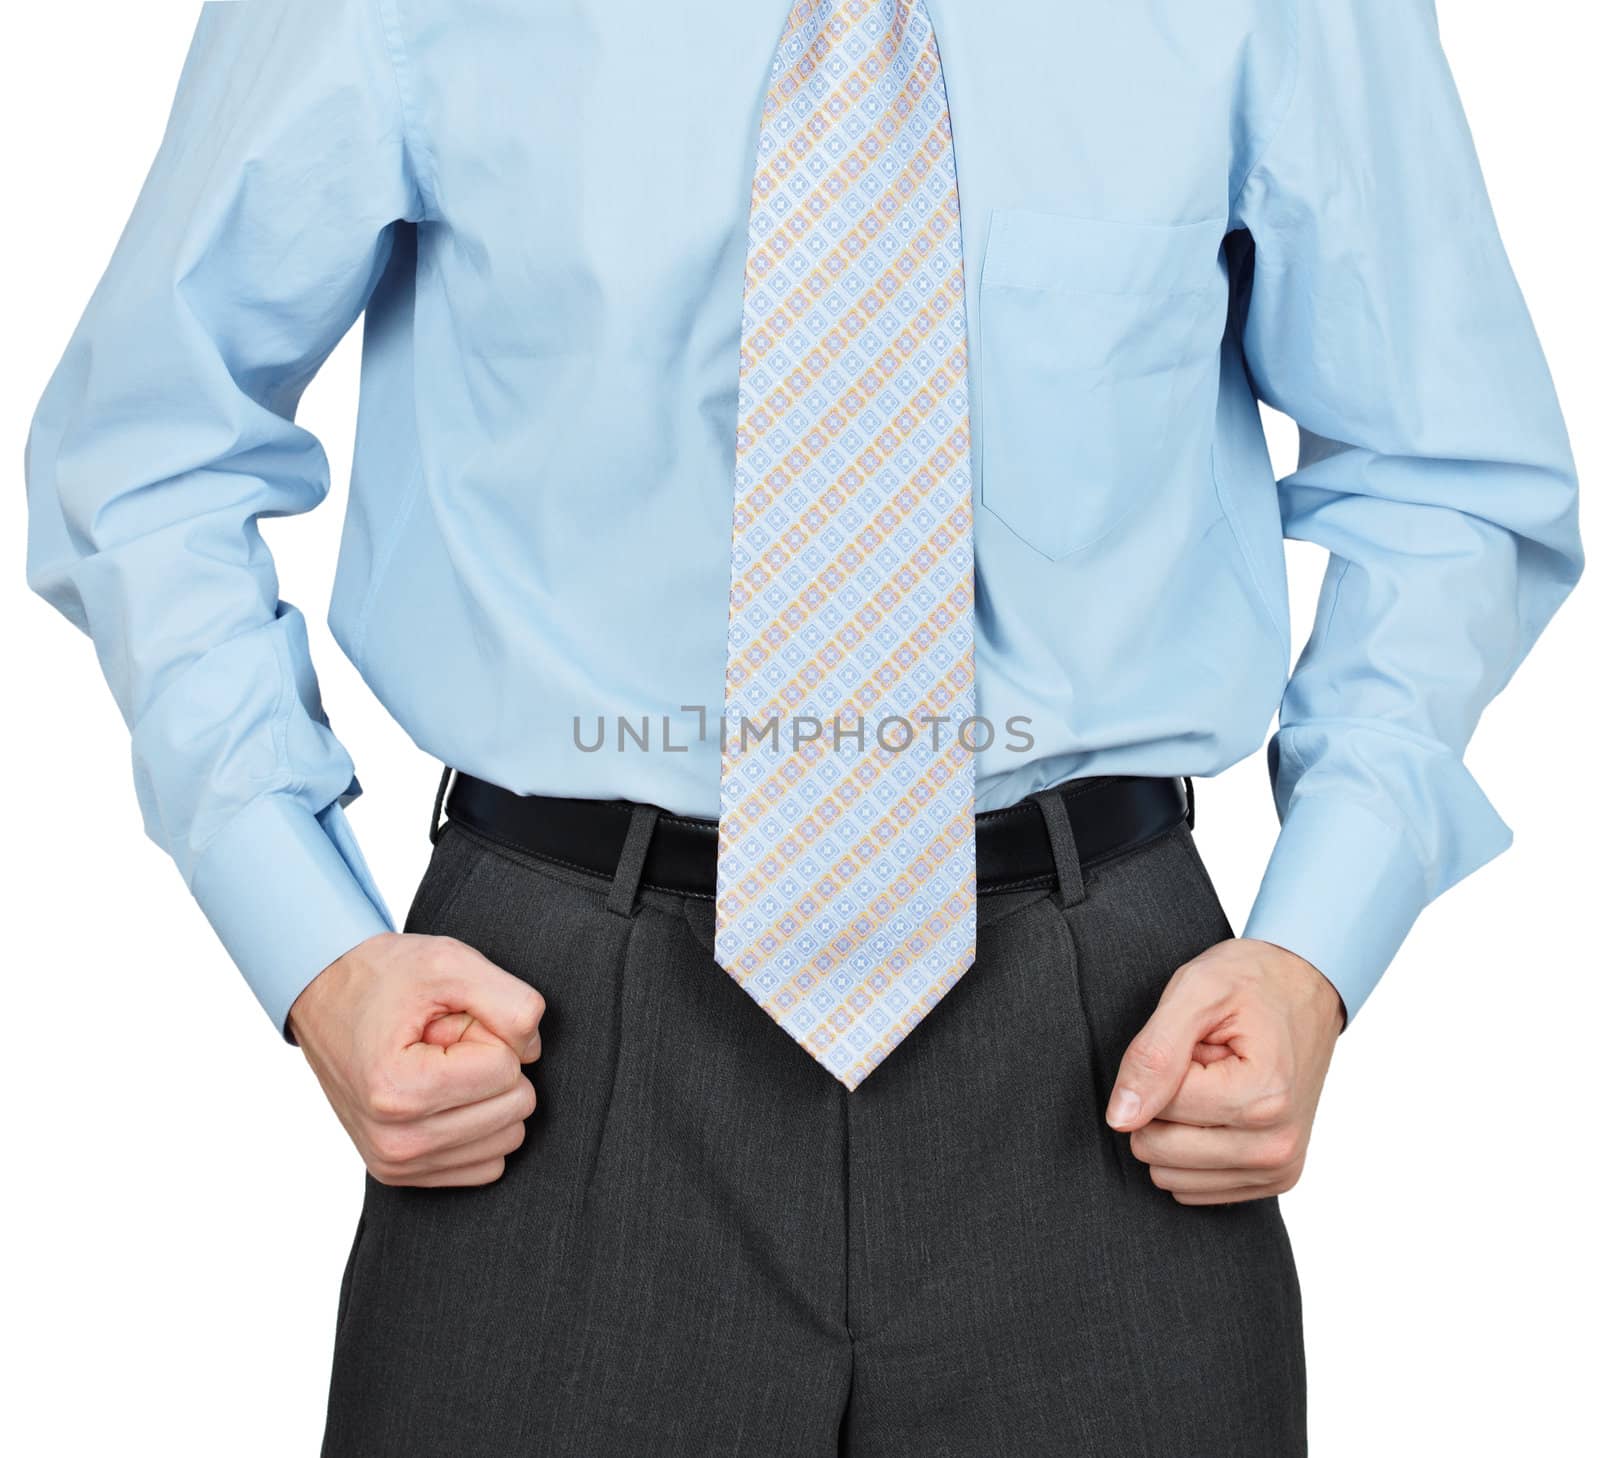 Hands of the young businessman clenched in fists on white